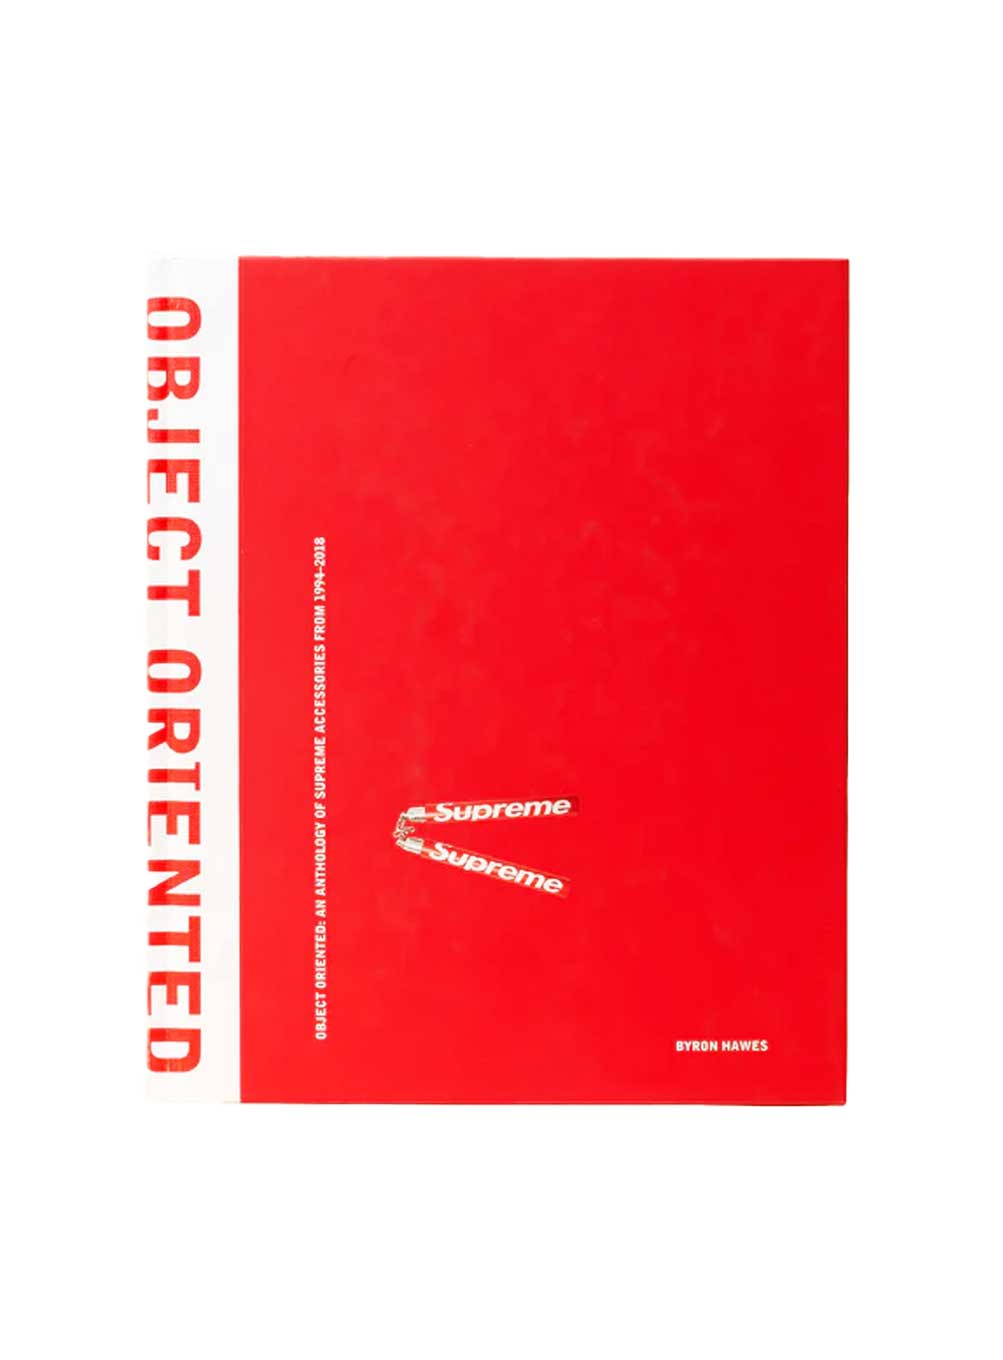 [9% SALE] Object Oriented: An Anthology of Supreme Accessories from 1994-2018